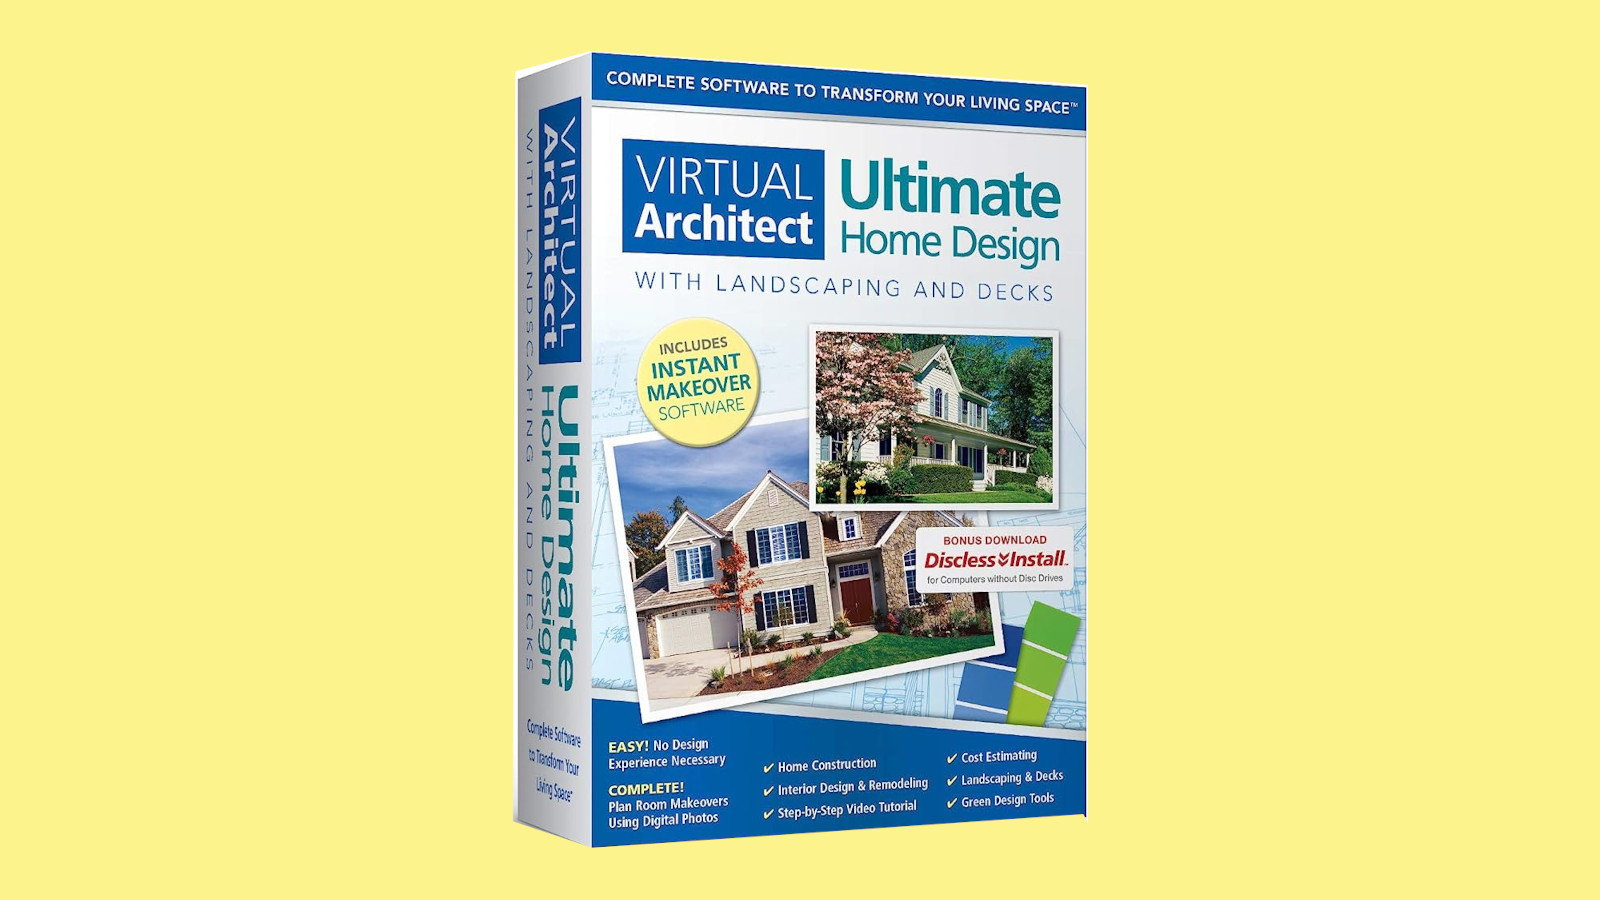 Virtual Architect Ultimate Home Design with Landscaping and Decks CD Key, 77.68 usd